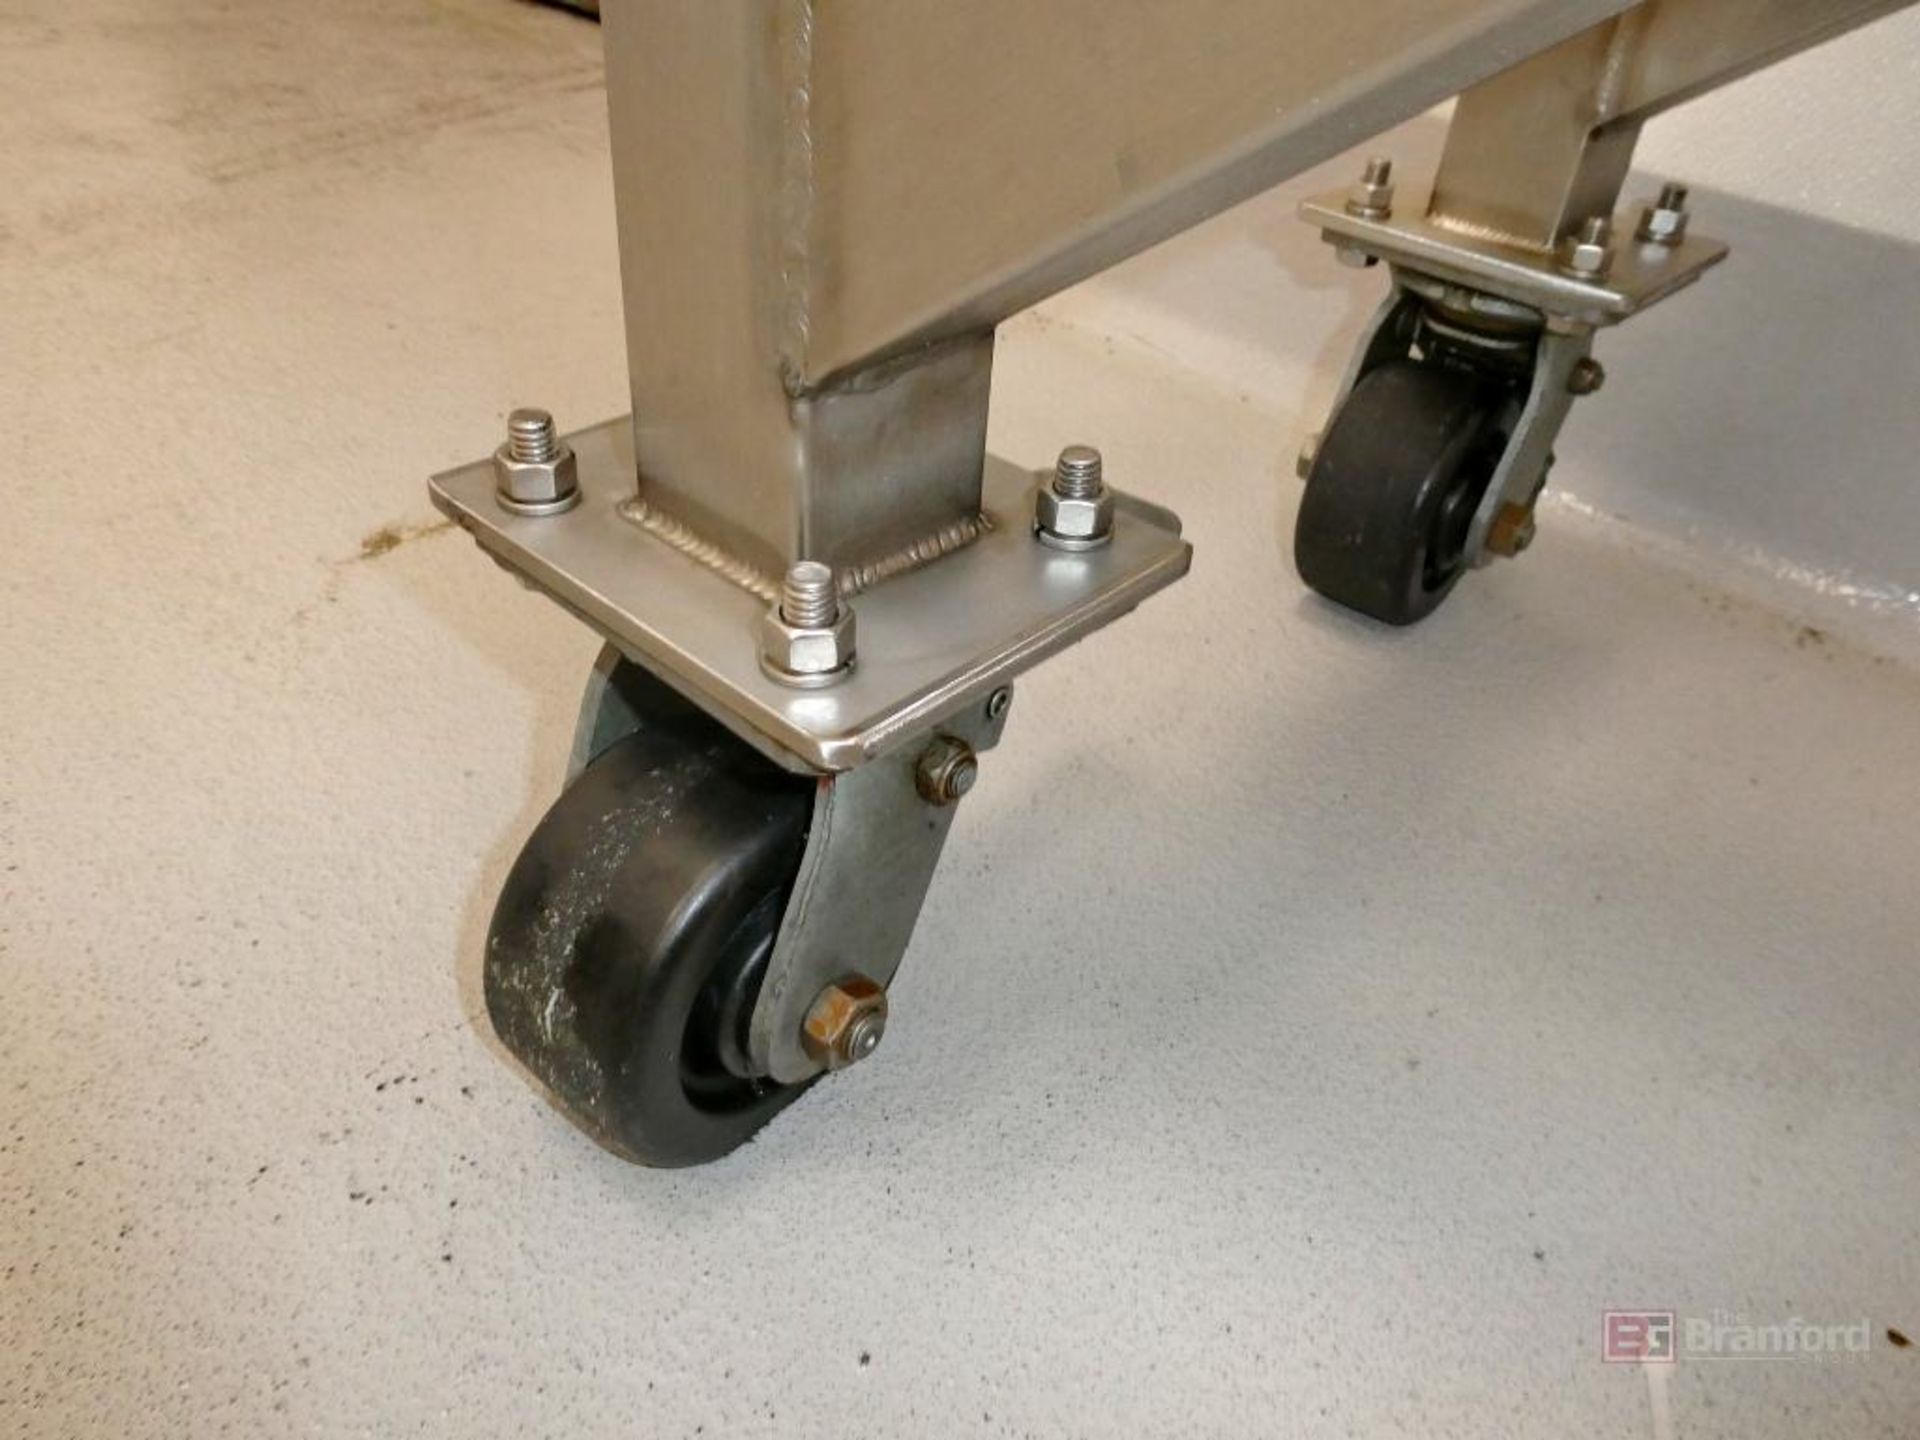 Stainless Steel Portable Work Platform - Image 2 of 2